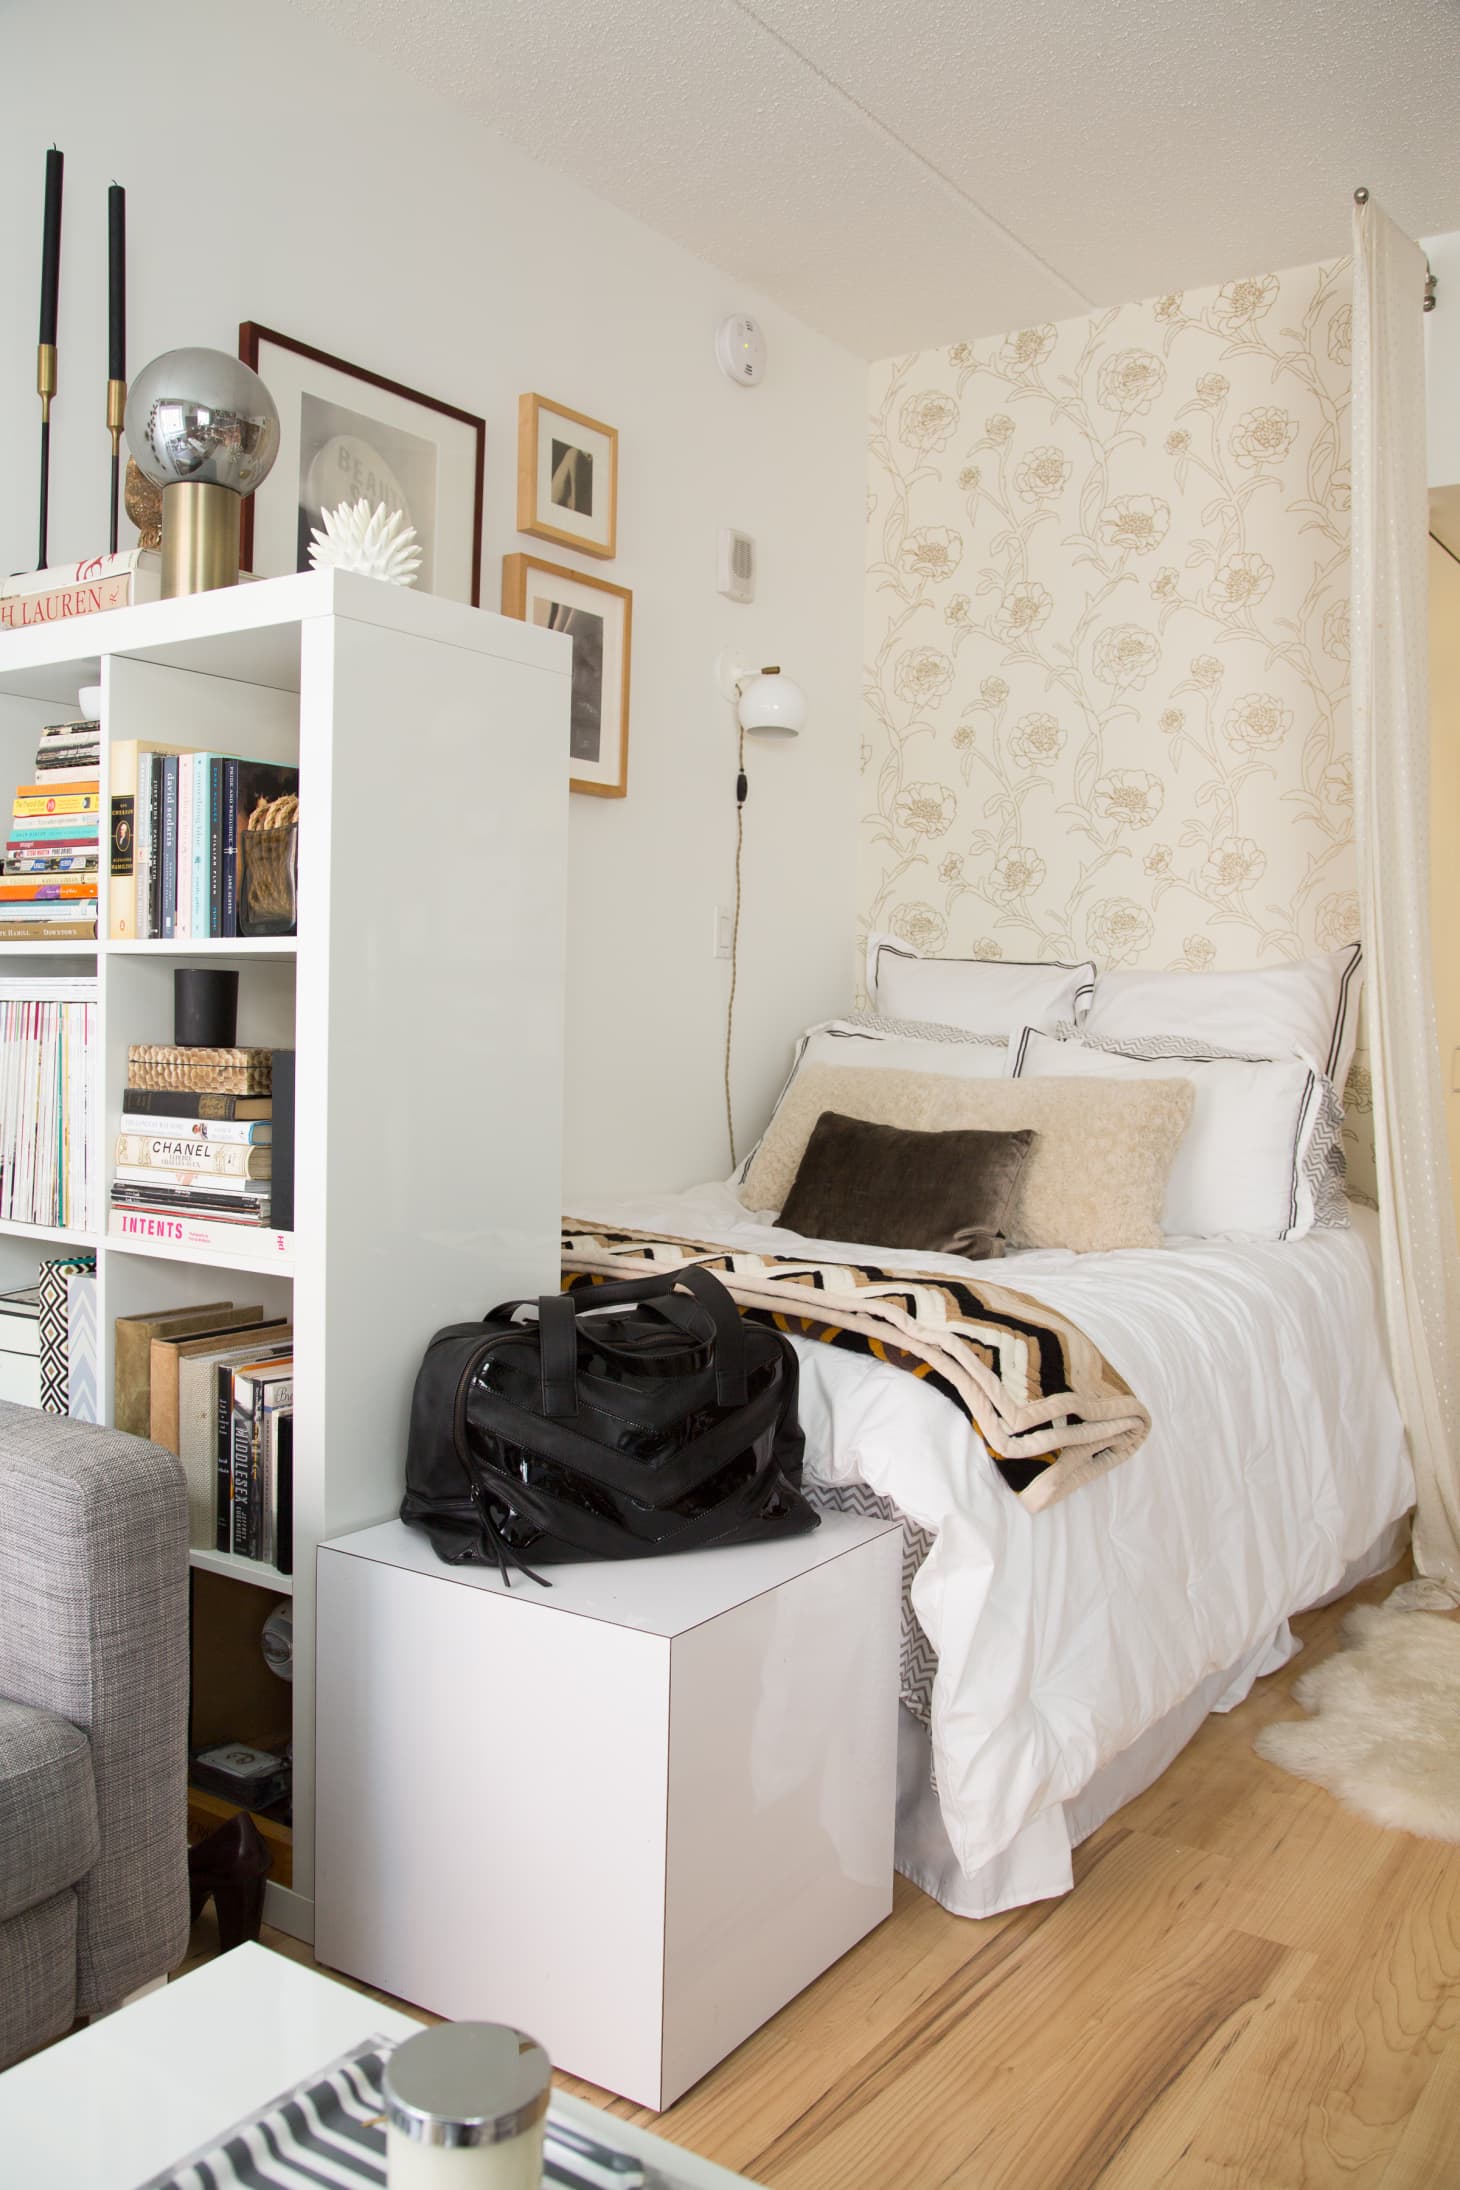 Best Small Bedroom Ideas - Design and Storage Tips | Apartment Therapy